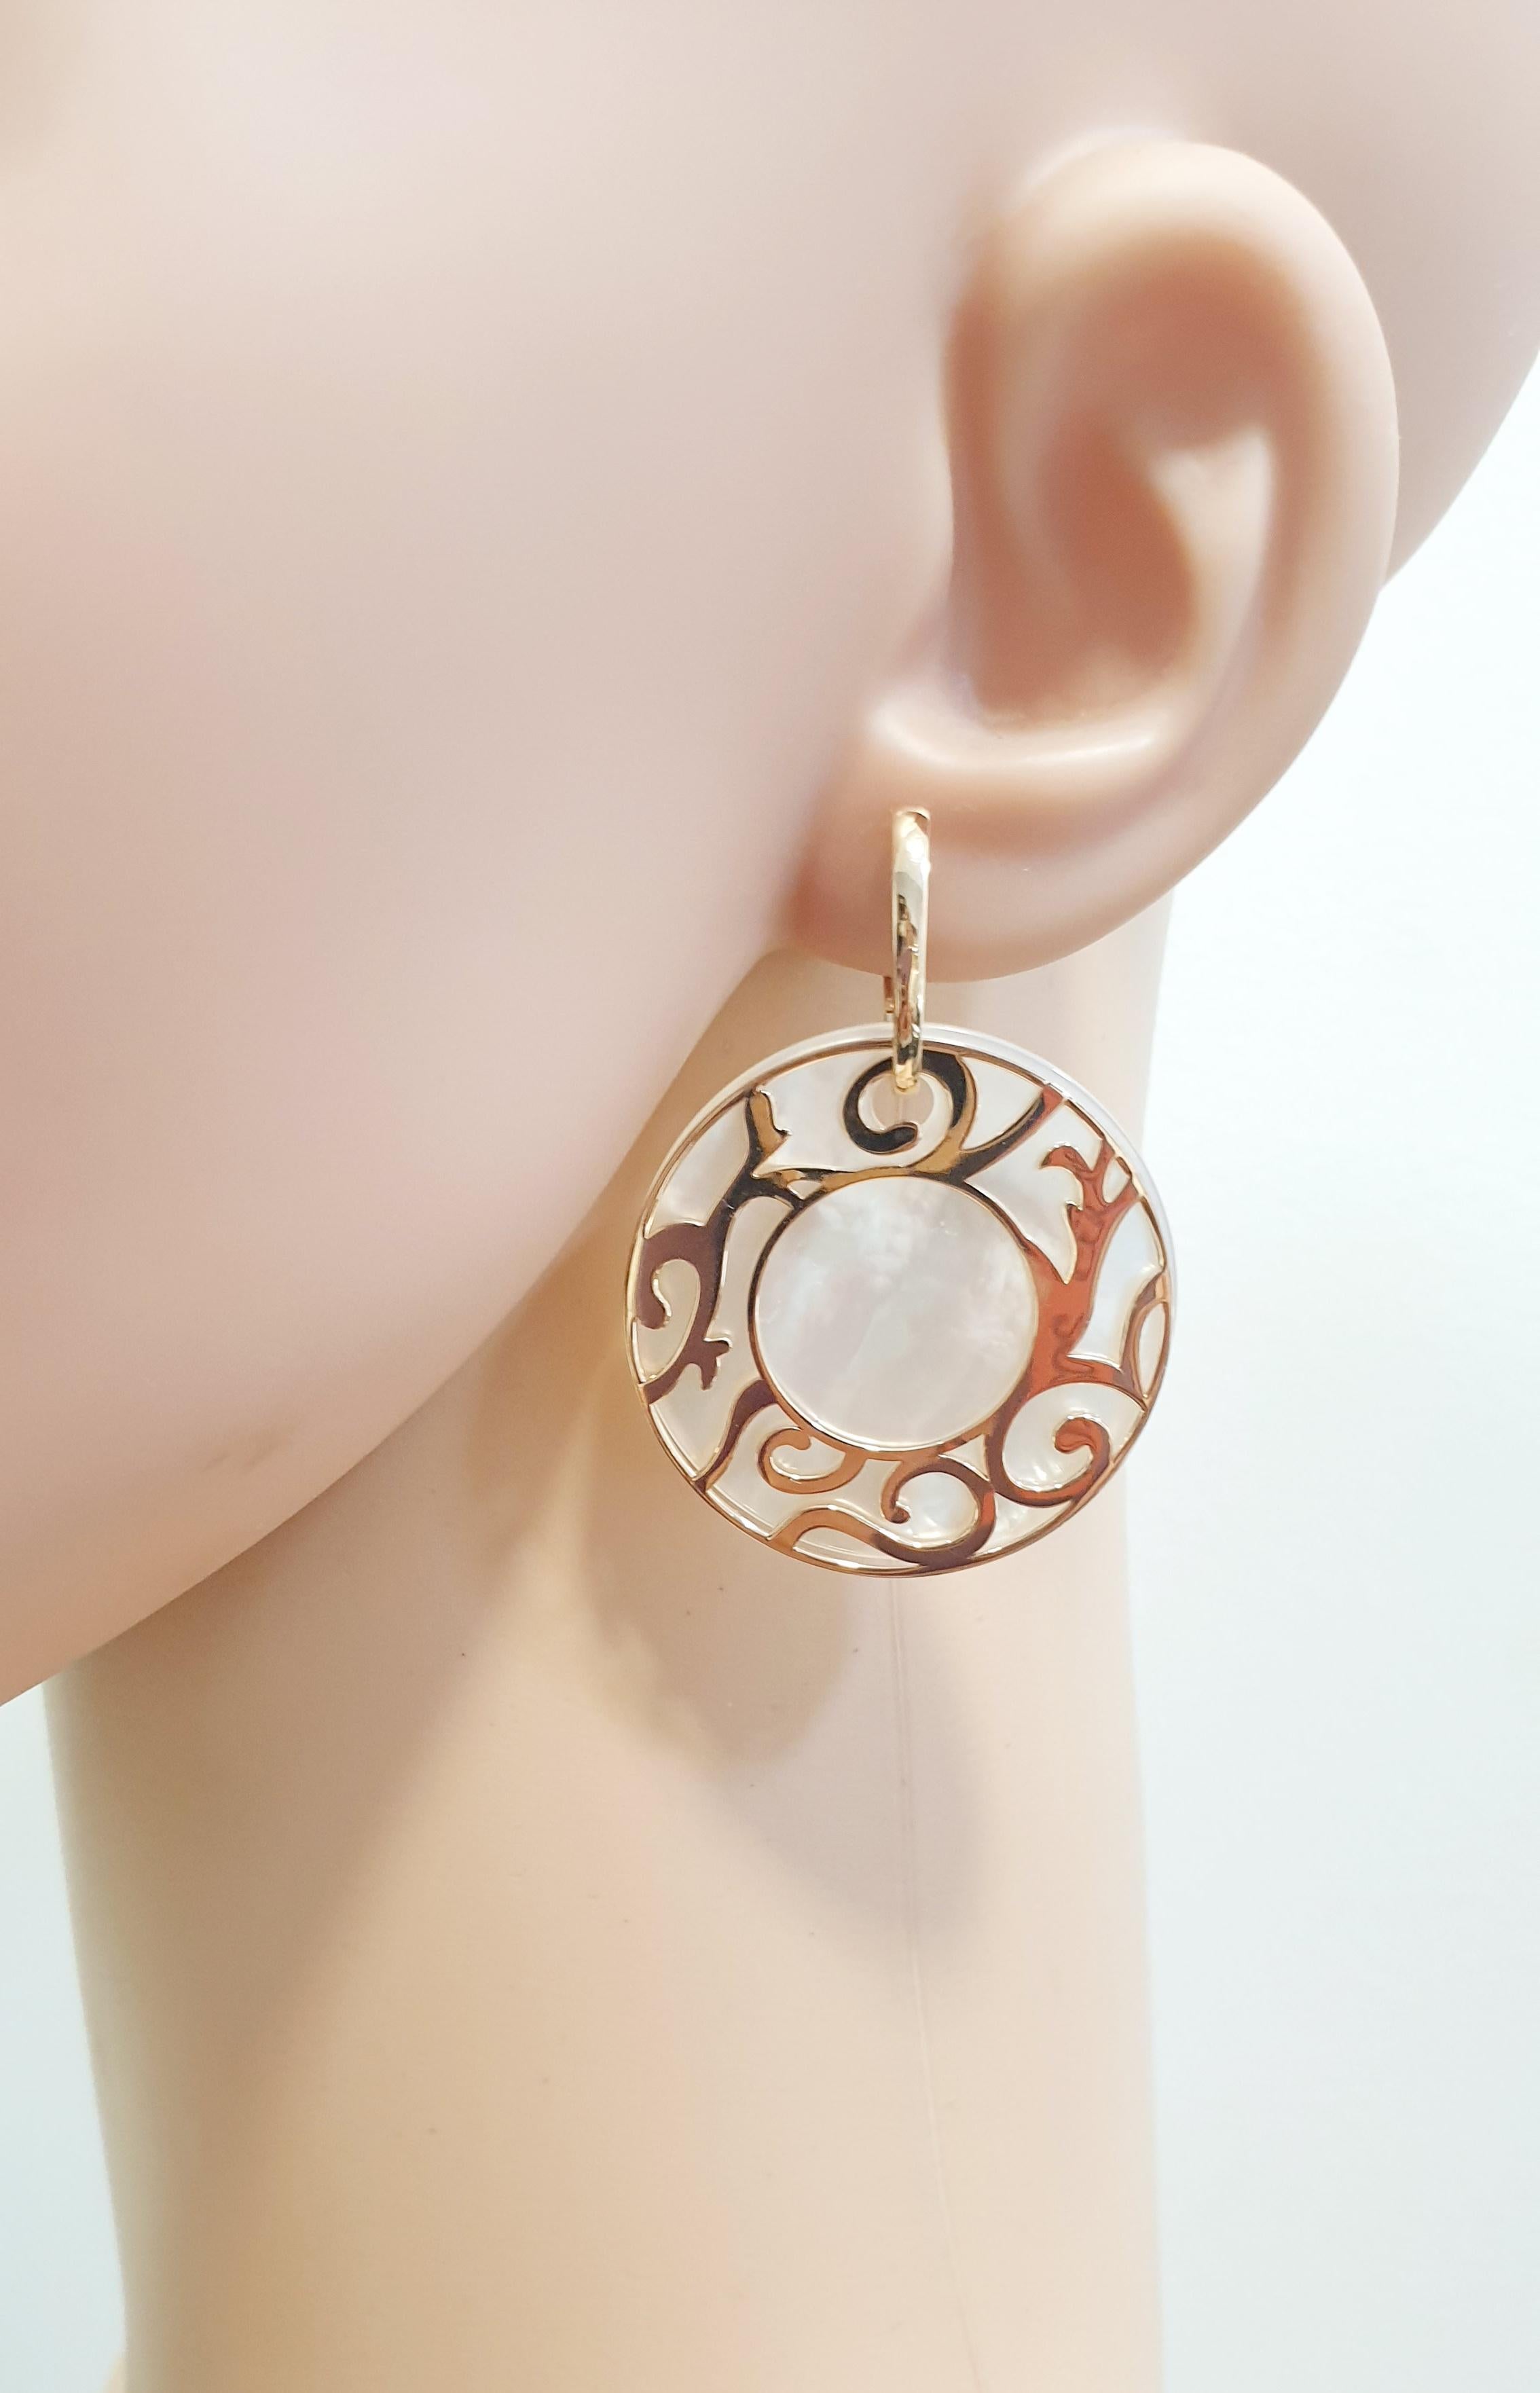 Mattioli Siriana Earrings (35mm) in Yellow, Rose or White  Gold & 3 Coloured Mother of Pearl Pieces.
Gold Weight: 12gr
Diameter: 35mm/1.37in   Size Medium

Important information for this ORDER !
Request availability if in stock inmediate